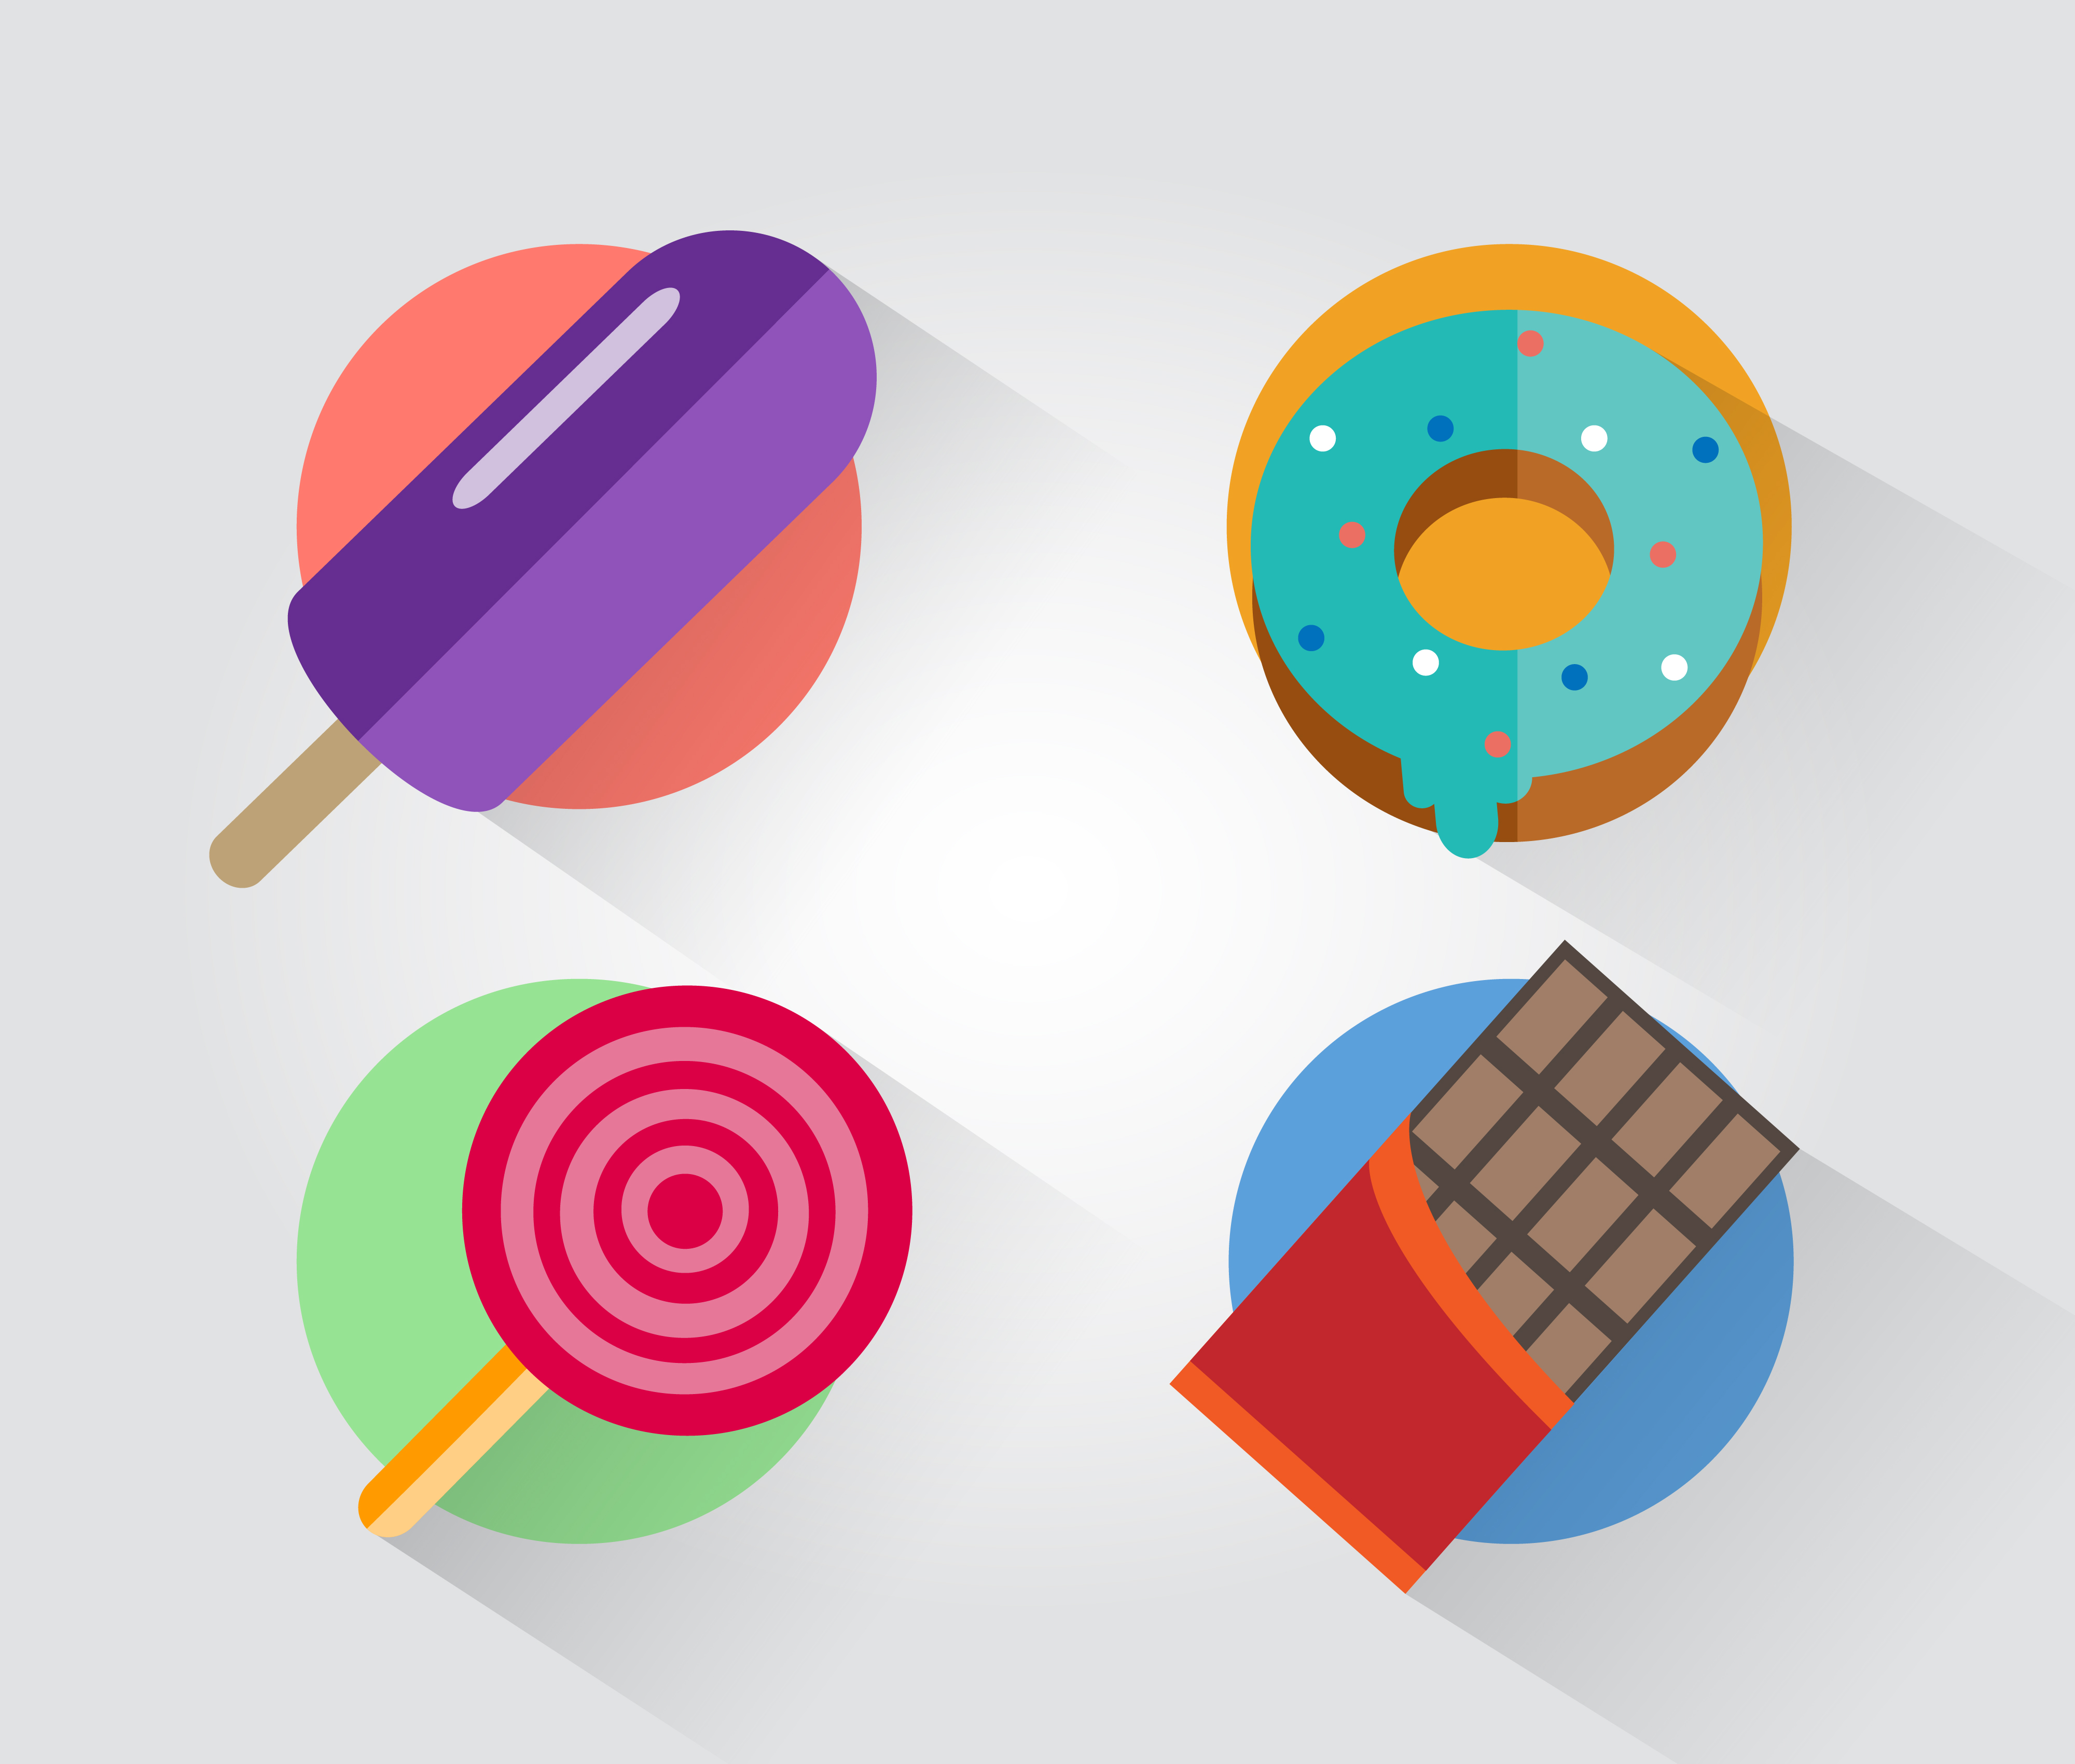 Food objects for design. Vector illustrations Photoshop brush